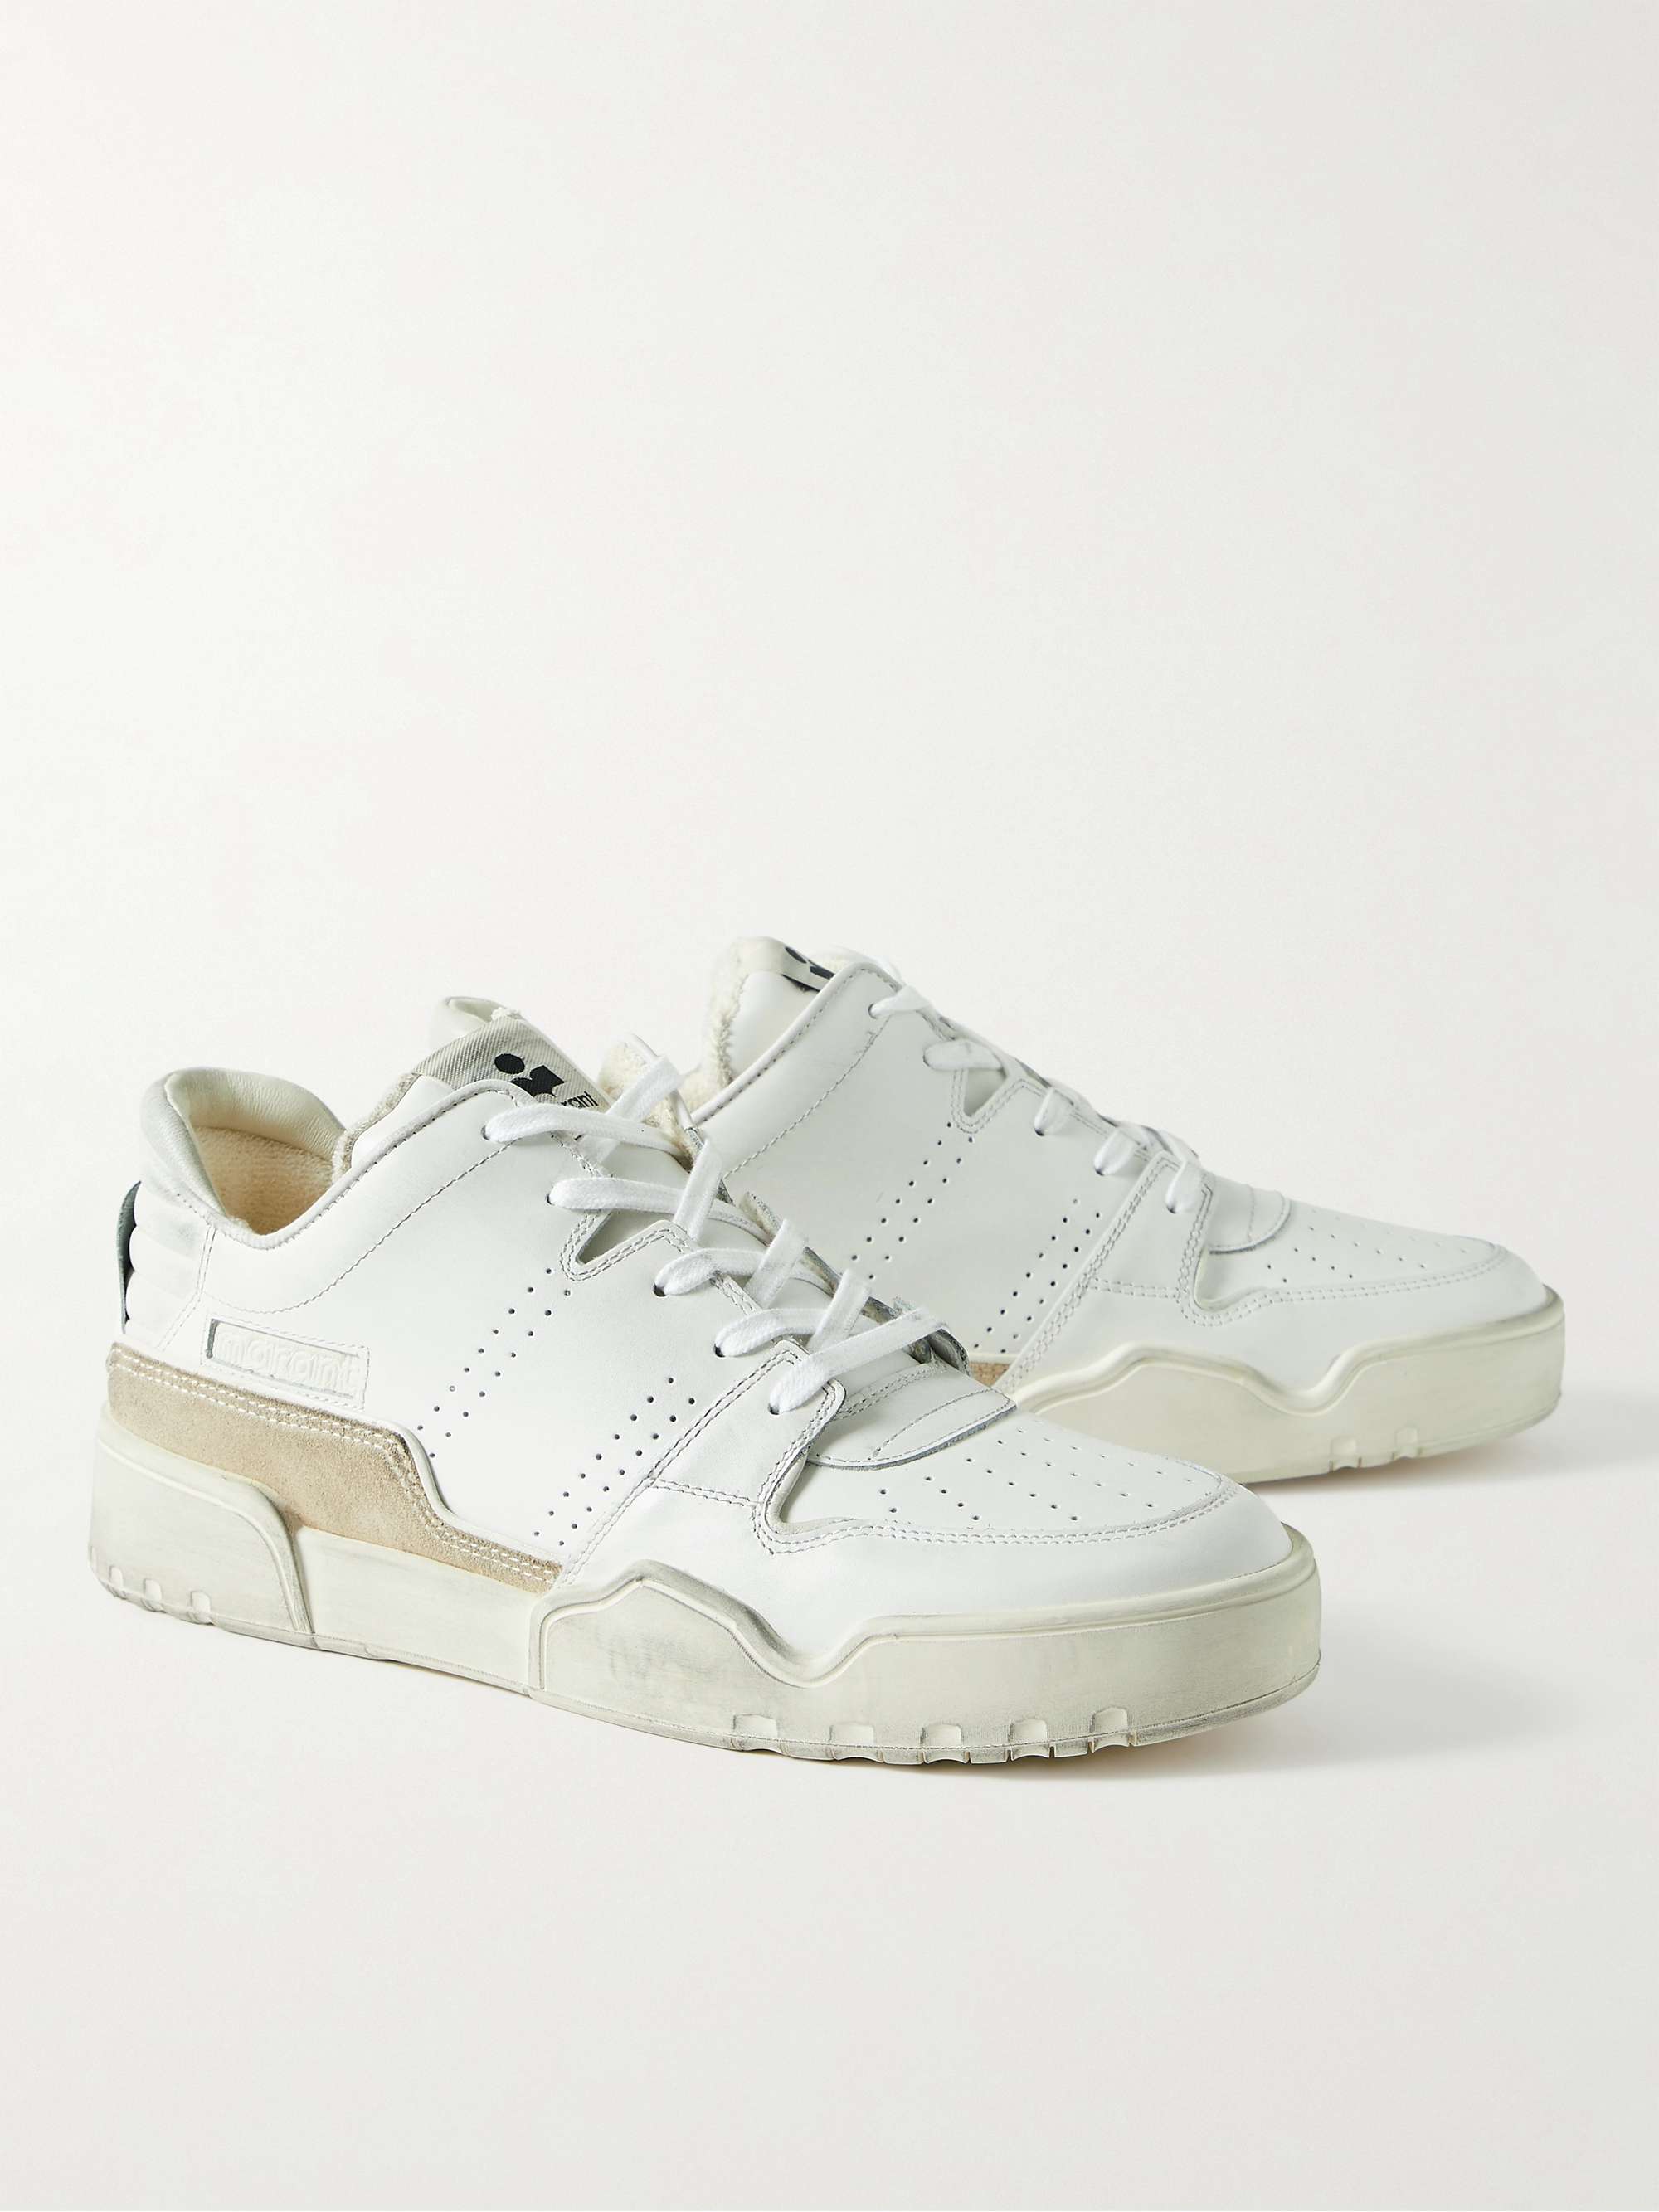 ISABEL MARANT Stadium Suede-Trimmed Leather Sneakers